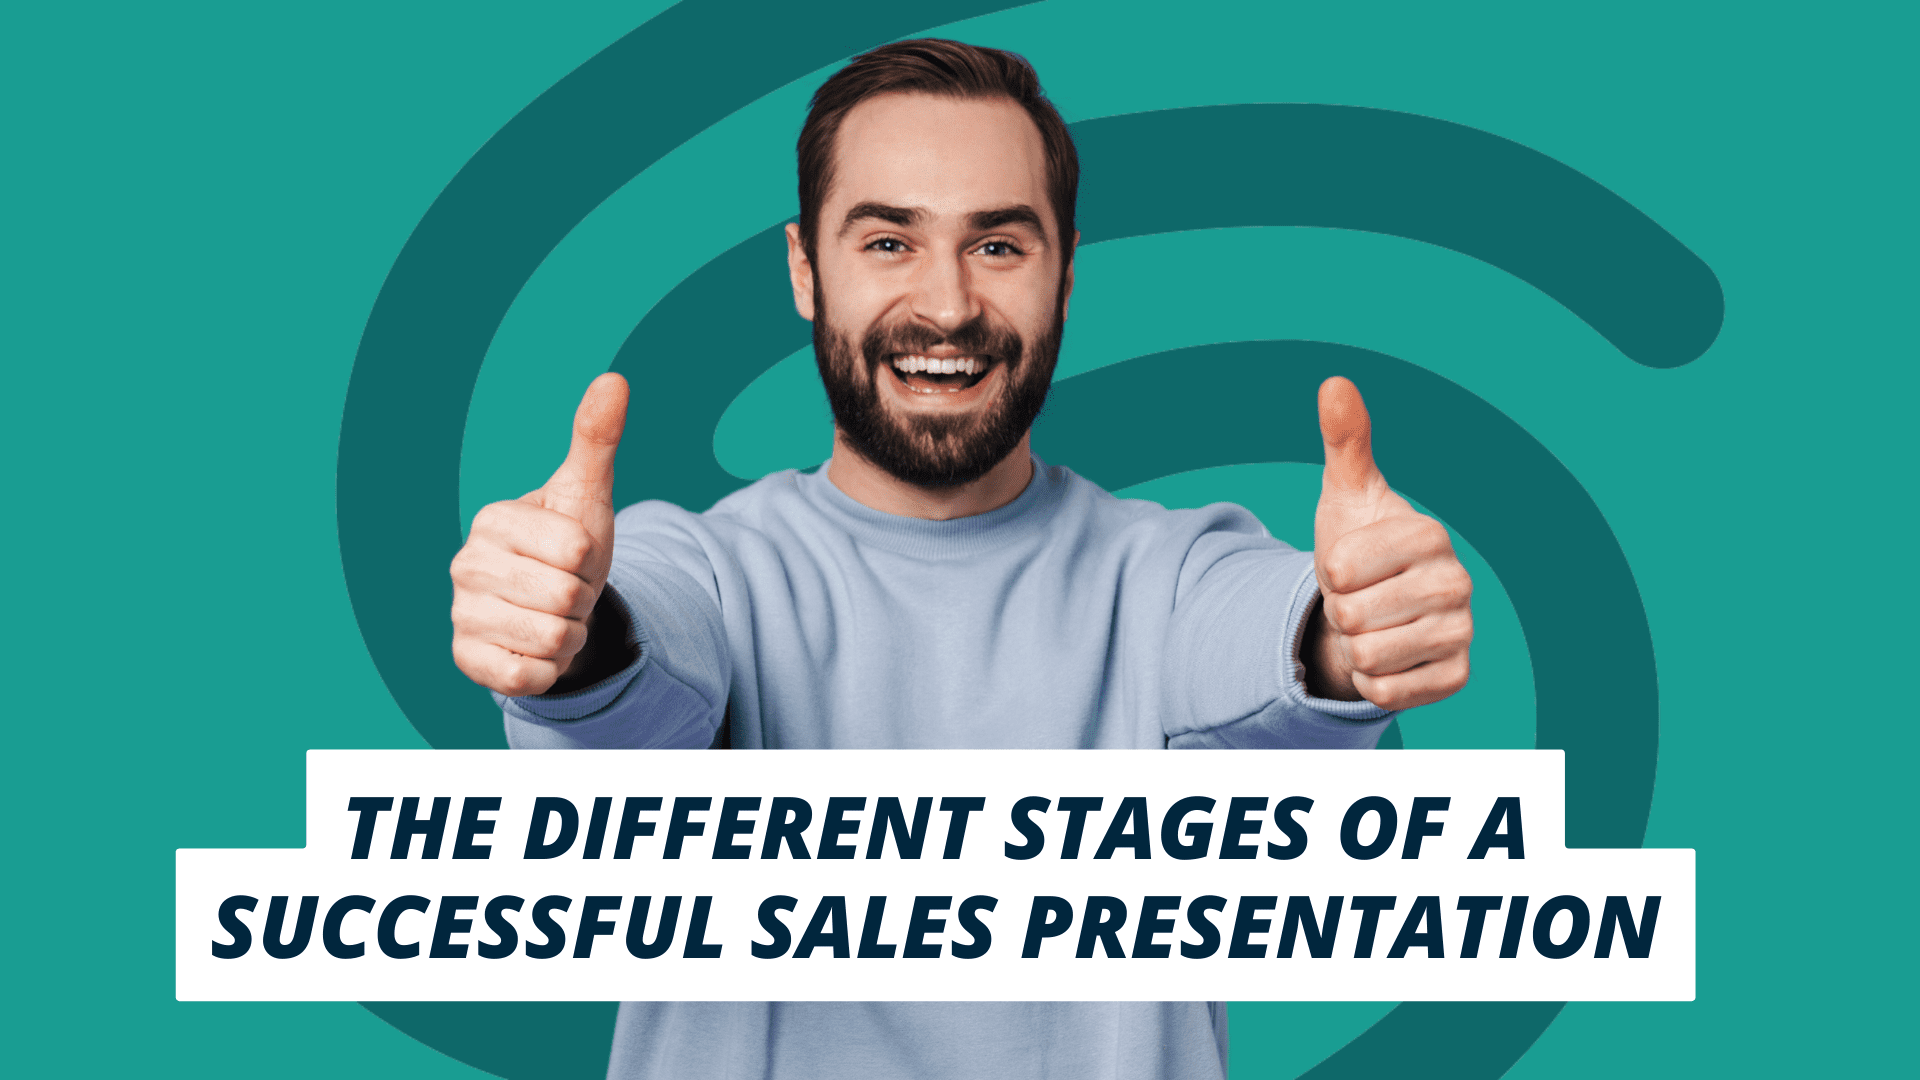 The different stages of a successful sales presentation